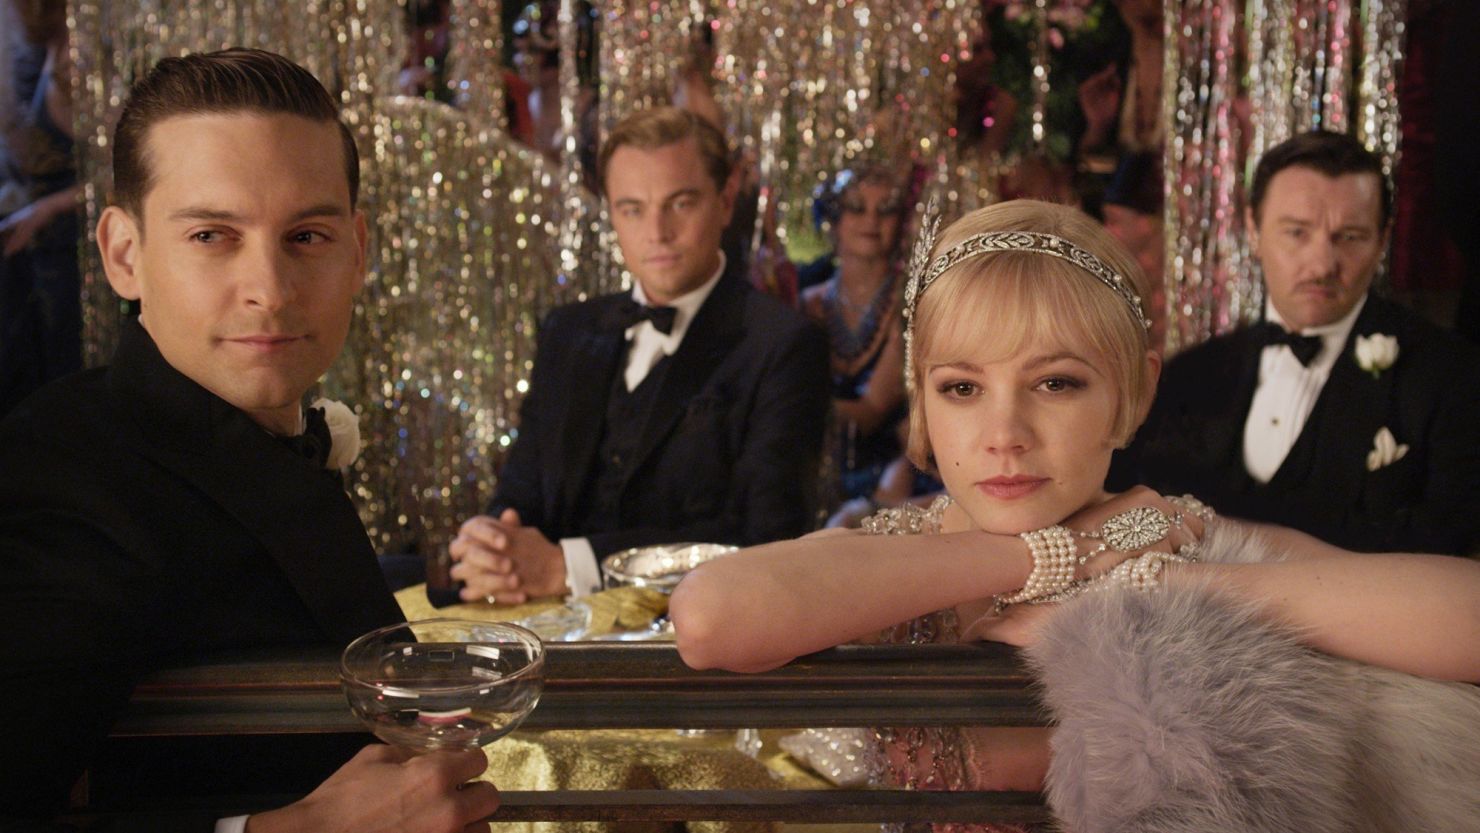 "The Great Gatsby" was originally slated to premiere on Christmas Day.